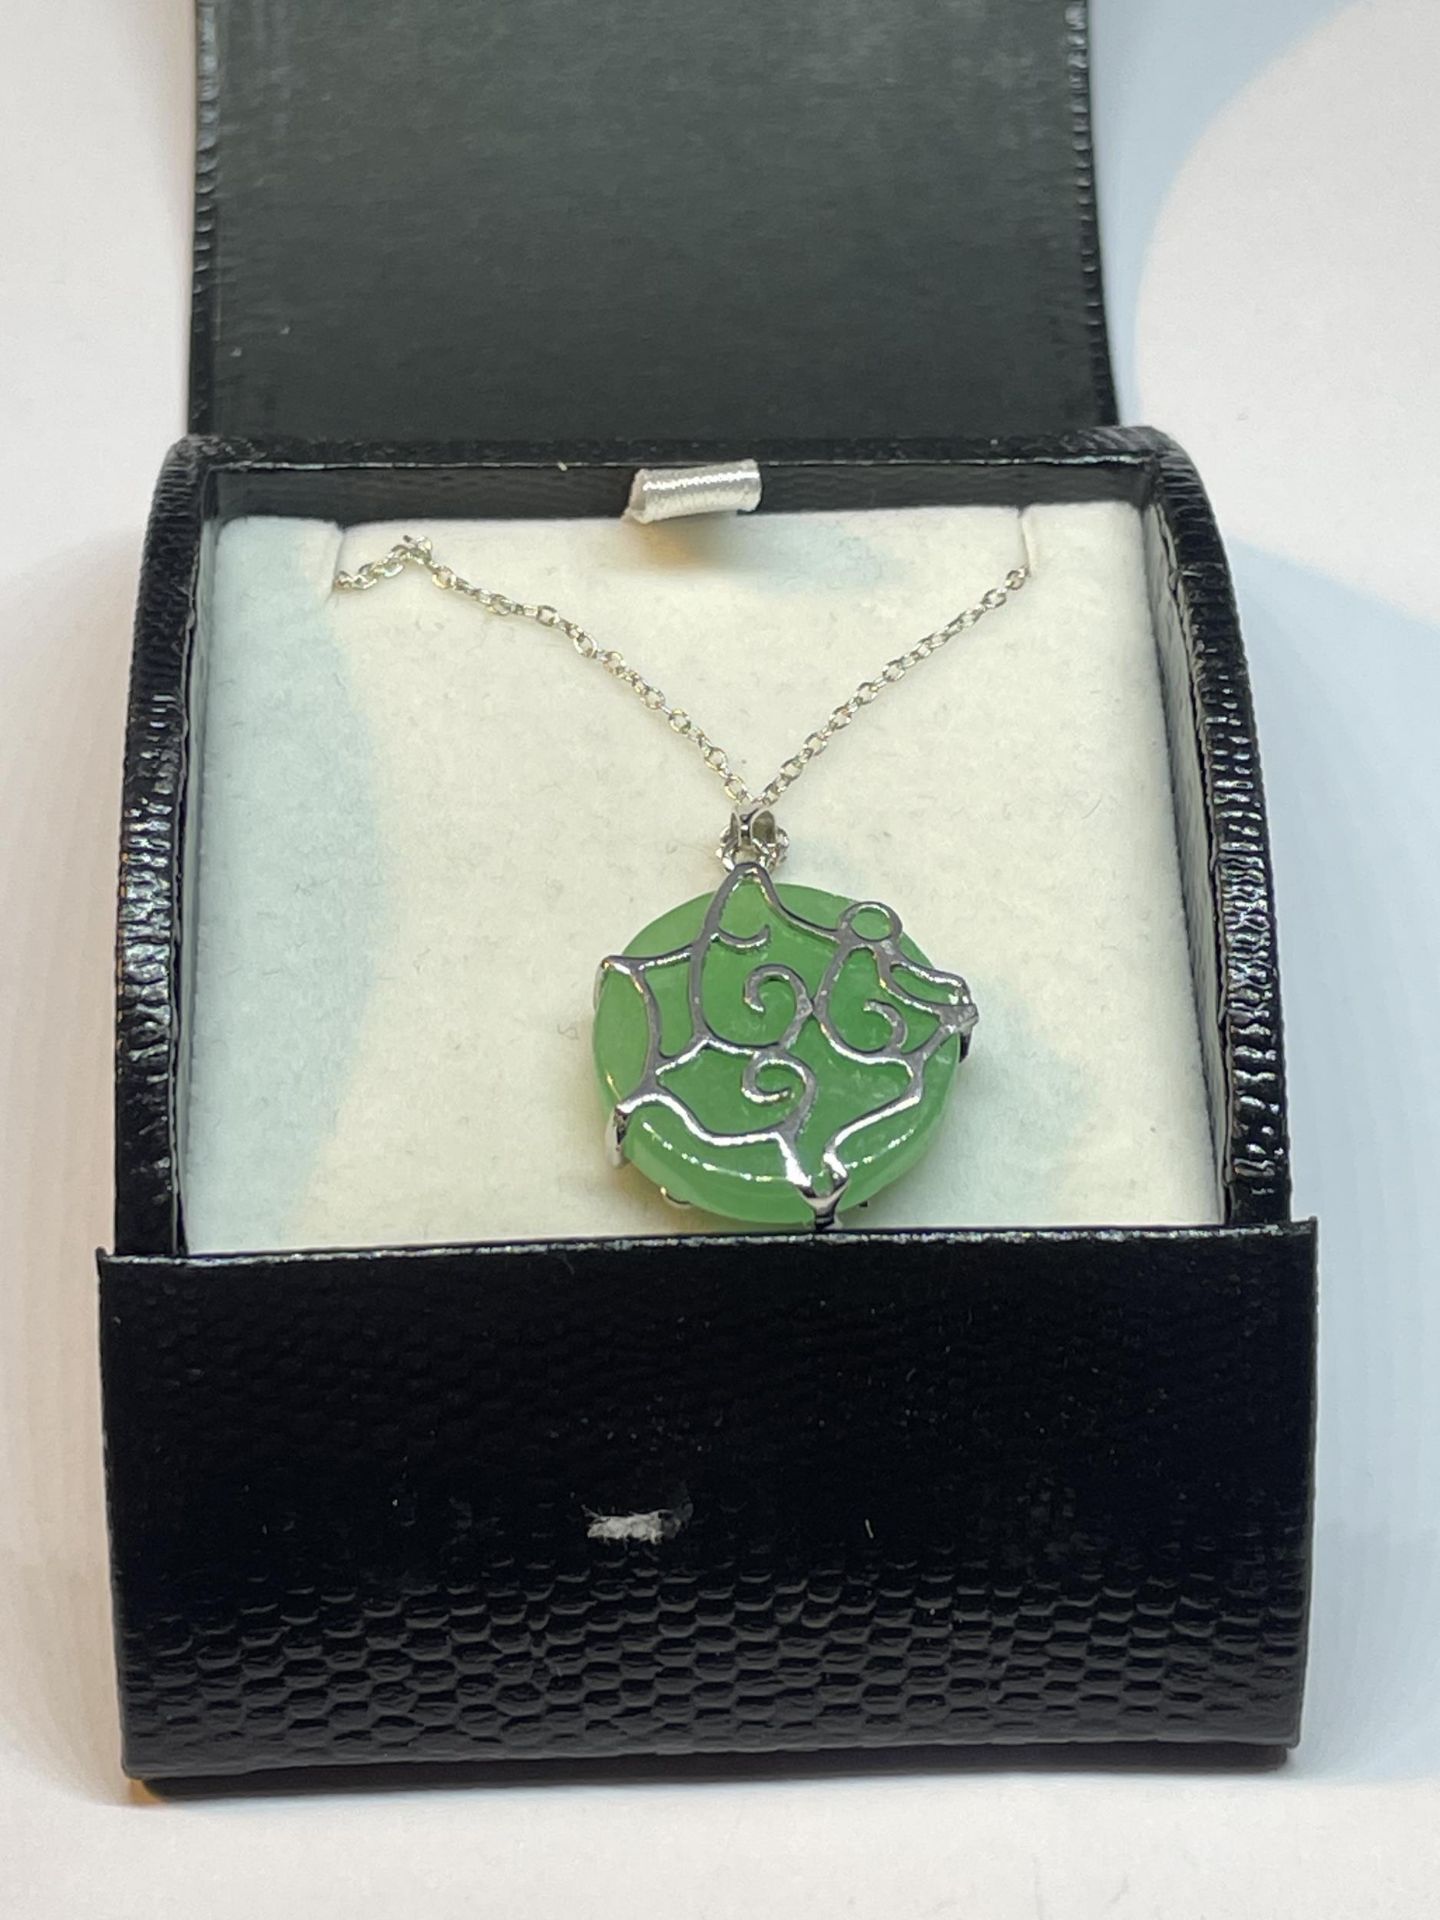 A SILVER AND JADE NECKLACE IN A PRESENTATION BOX